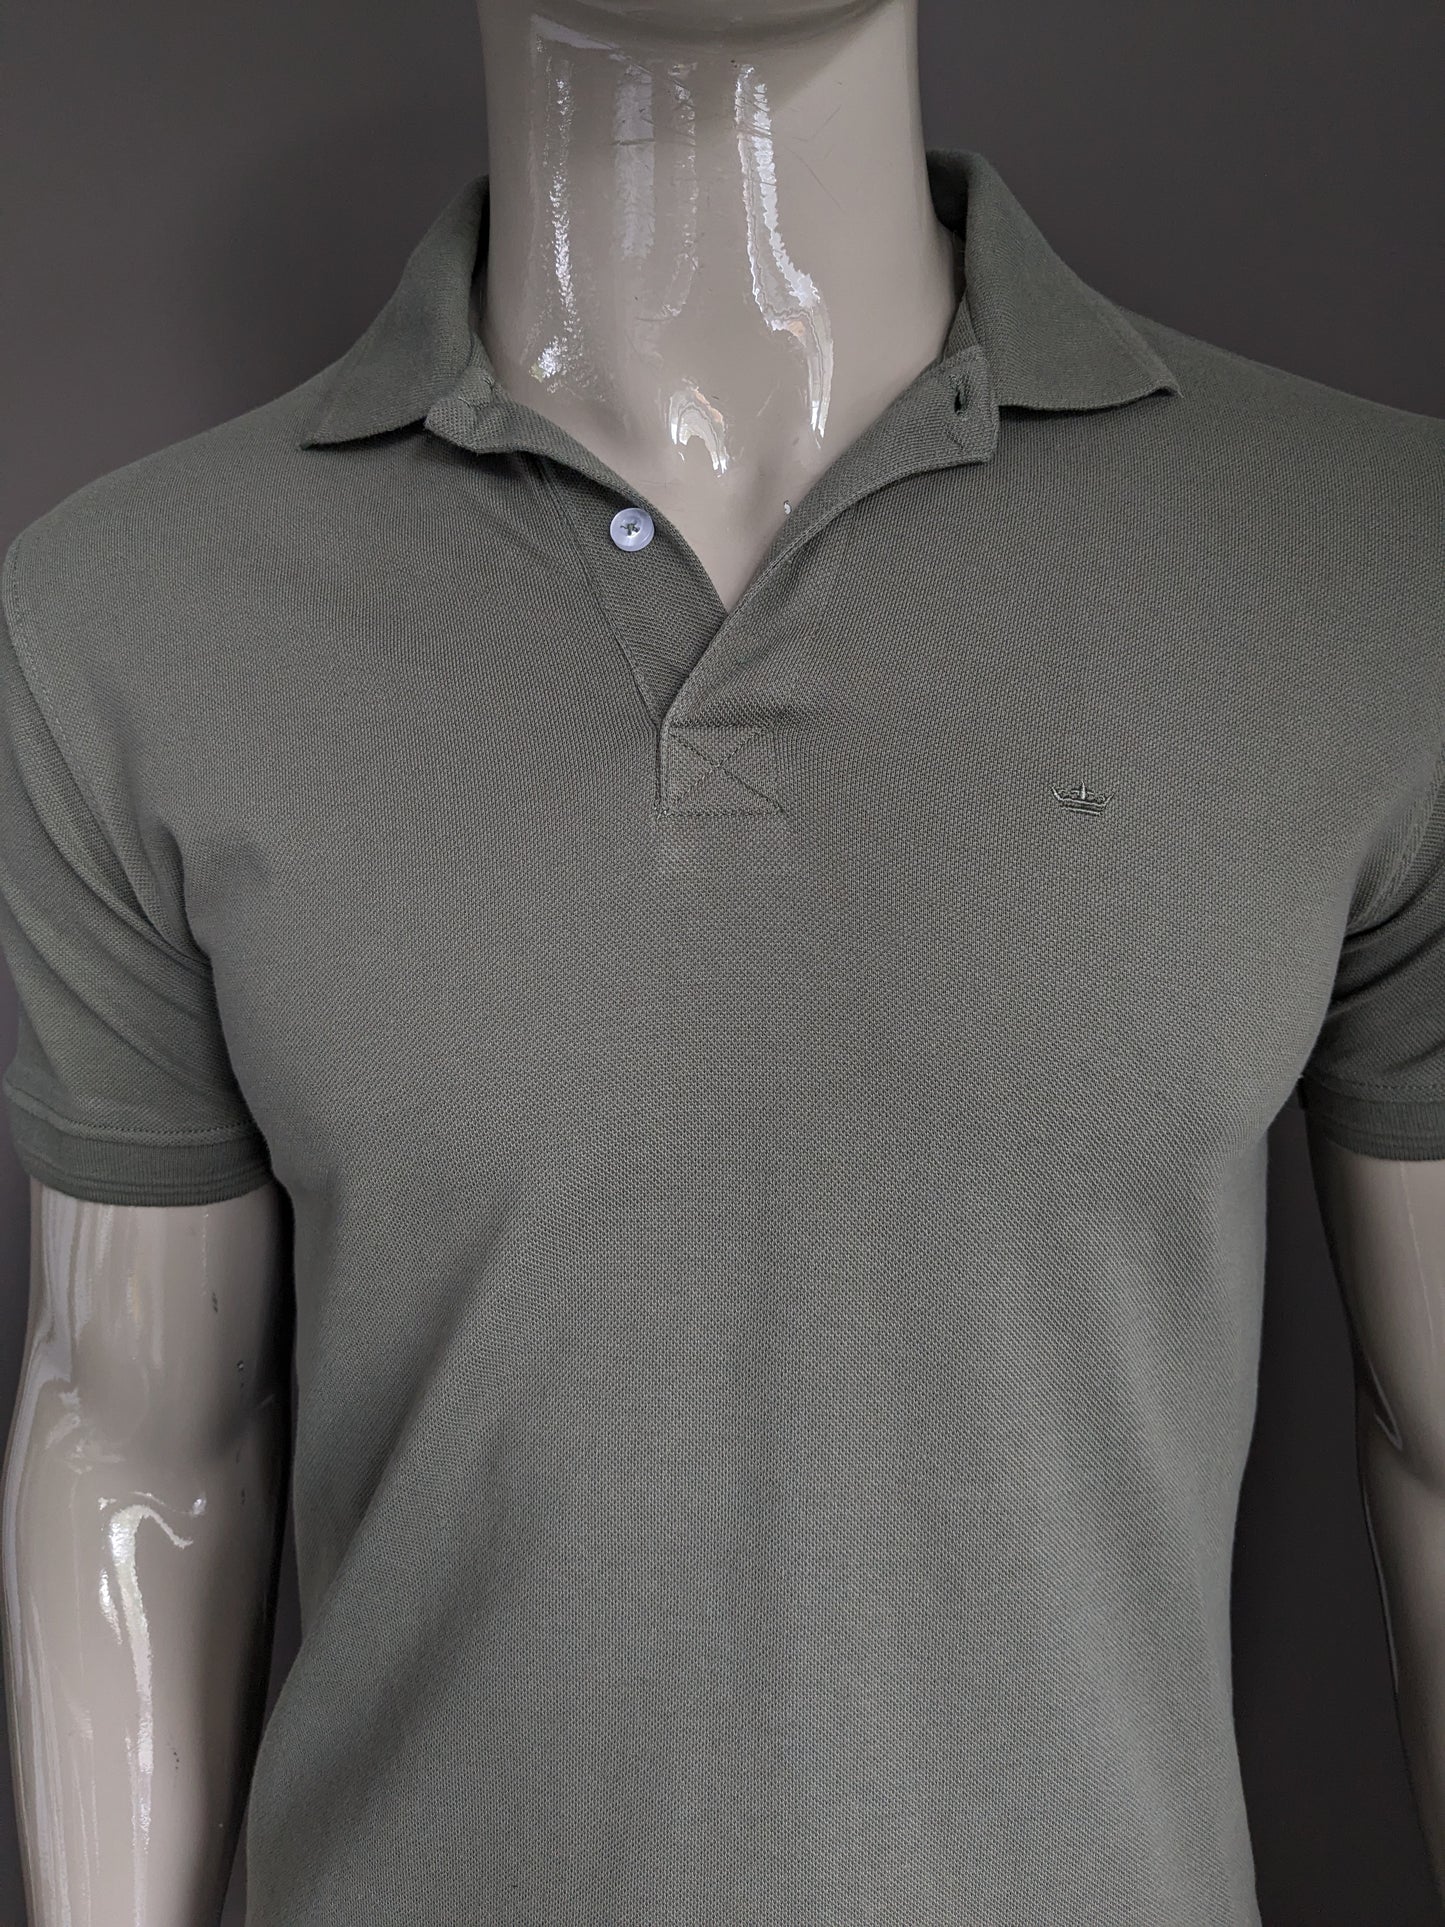 Meyer & Meyer Polo. Colored green. Size M.